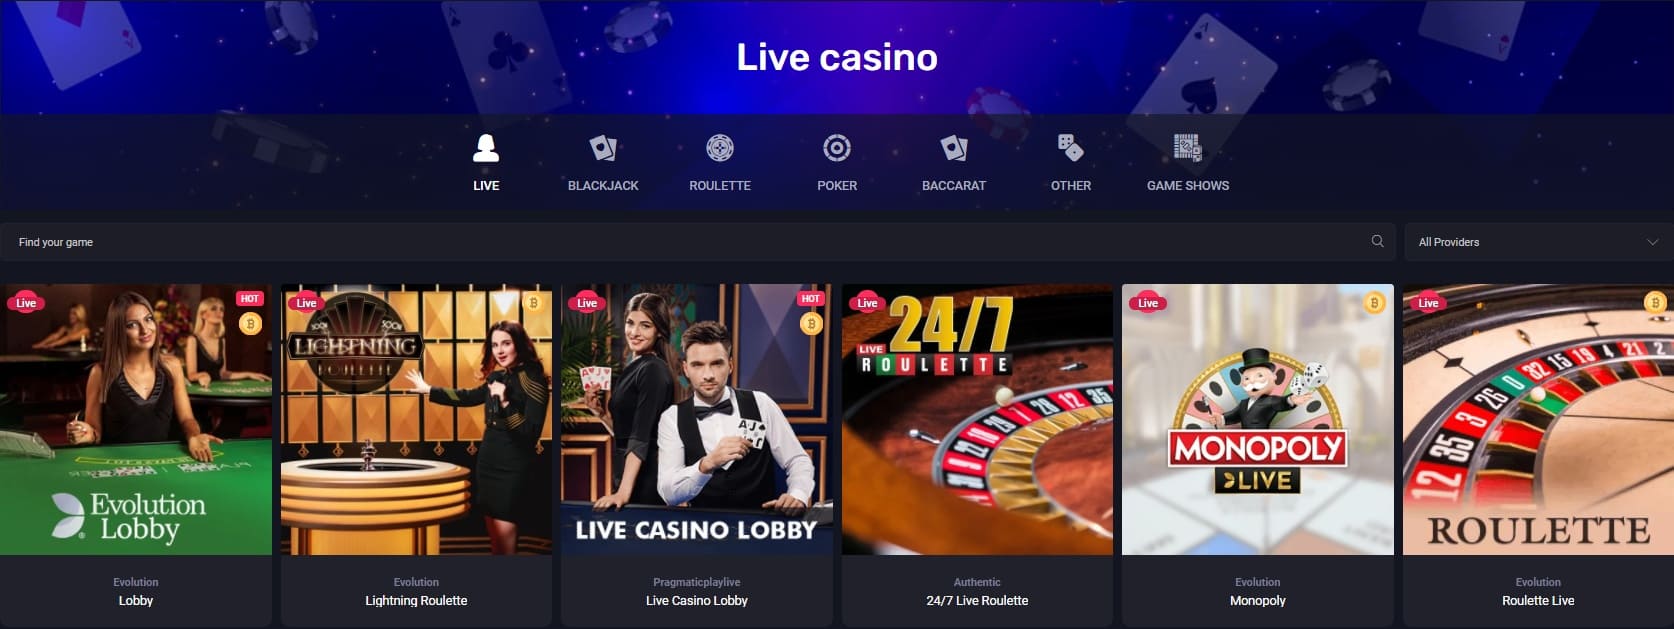 10 Reasons Why Having An Excellent online casinos Is Not Enough